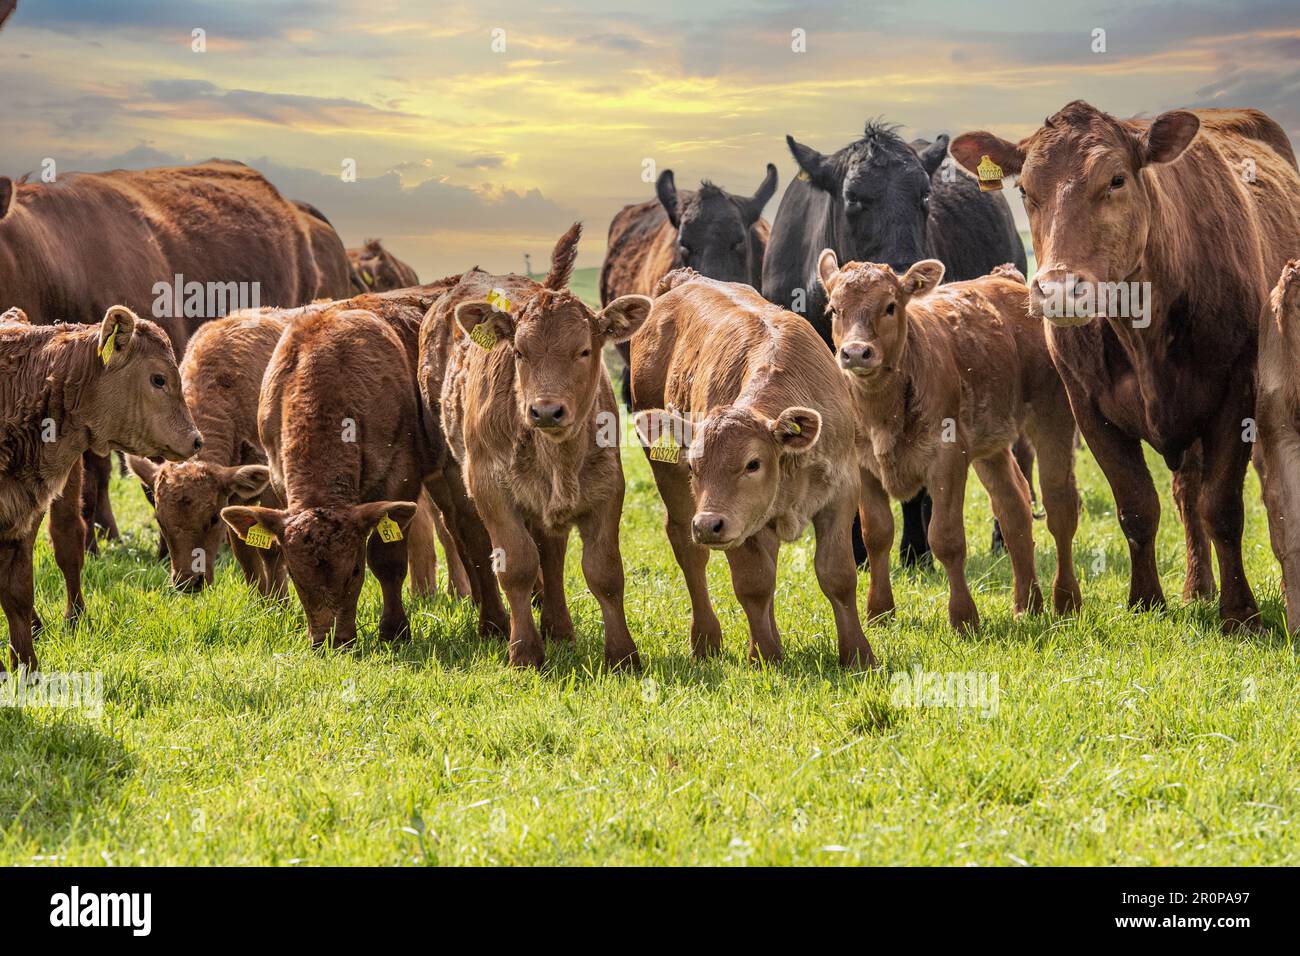 Herd of beef cattle, cows and calves Stock Photo